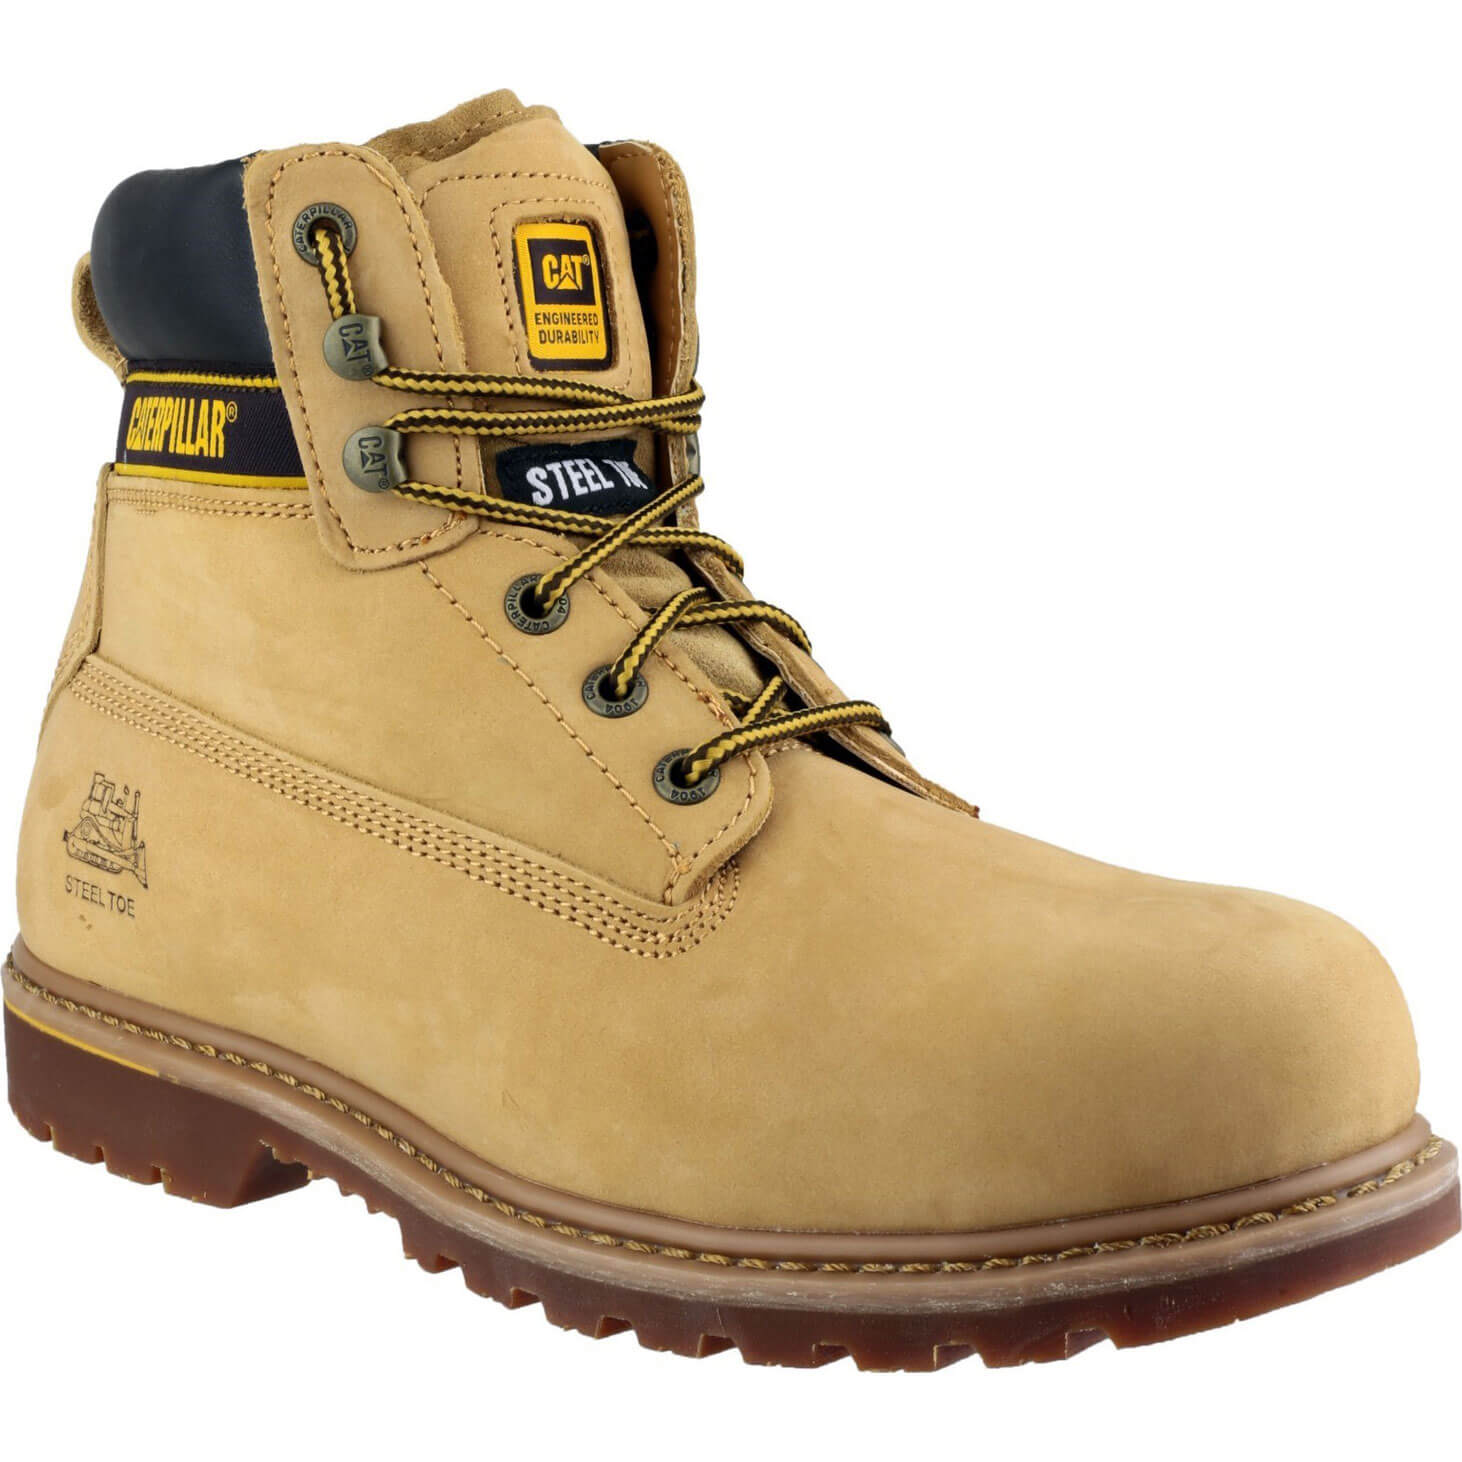 Caterpillar Mens Holton Safety Boots Honey Size 12